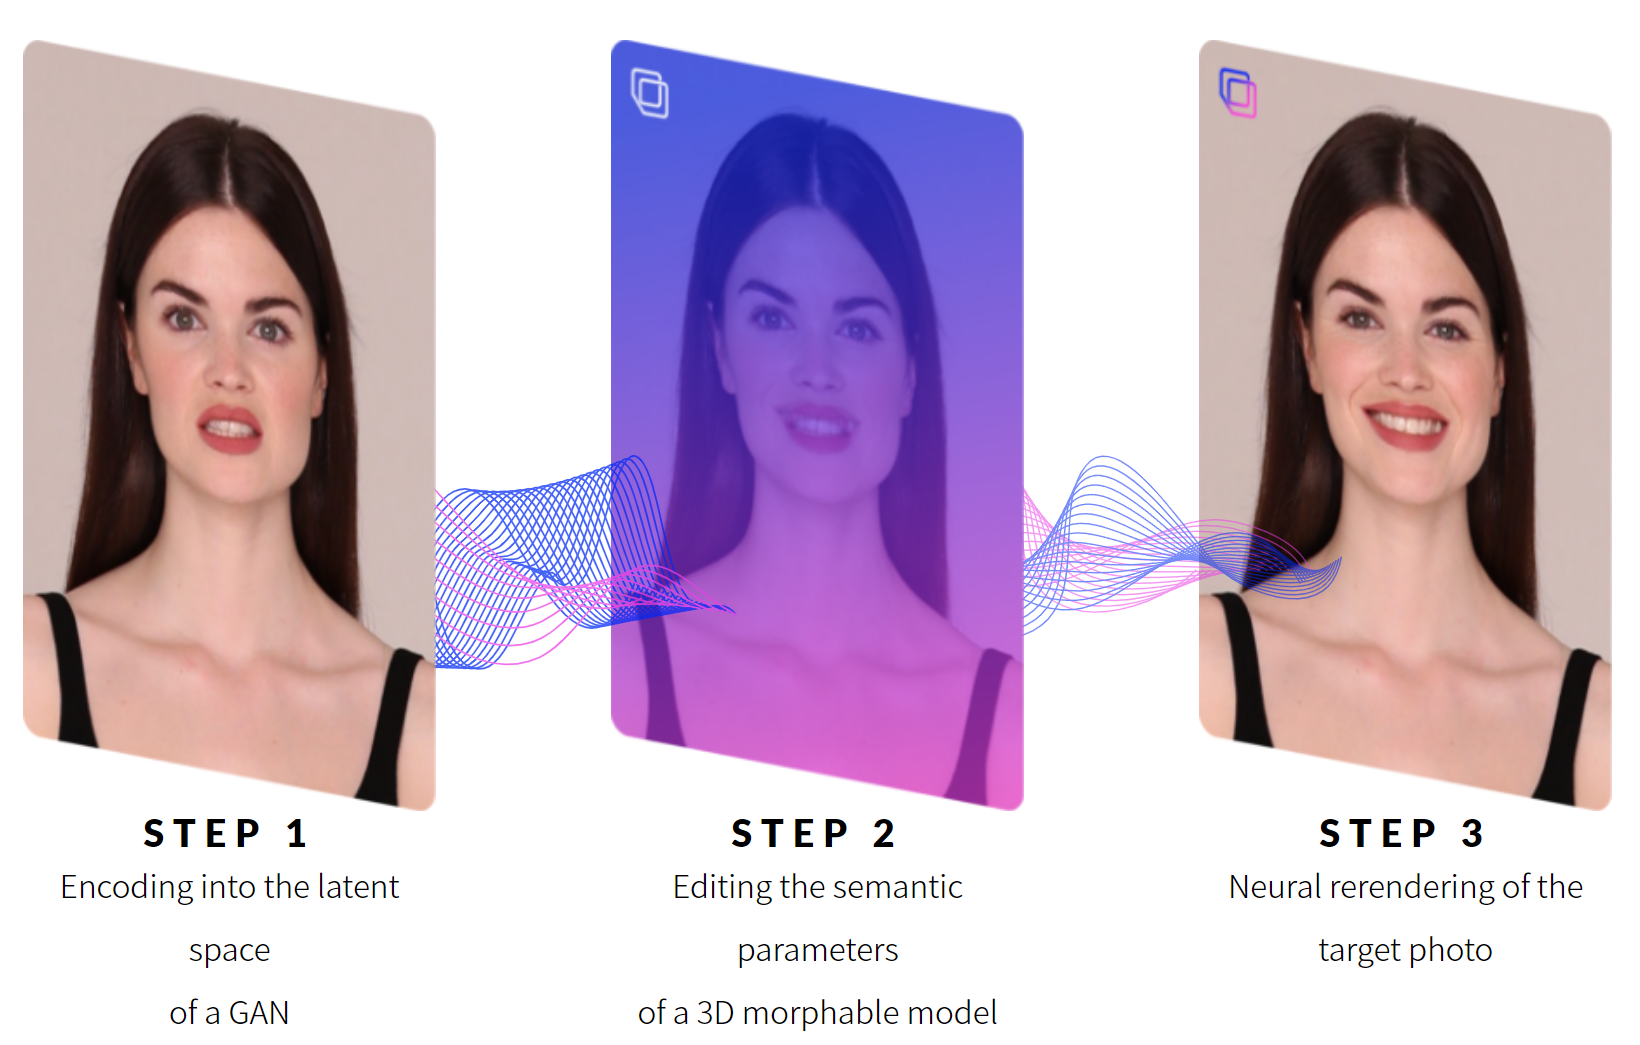 Instantly add emotion to faces with AI